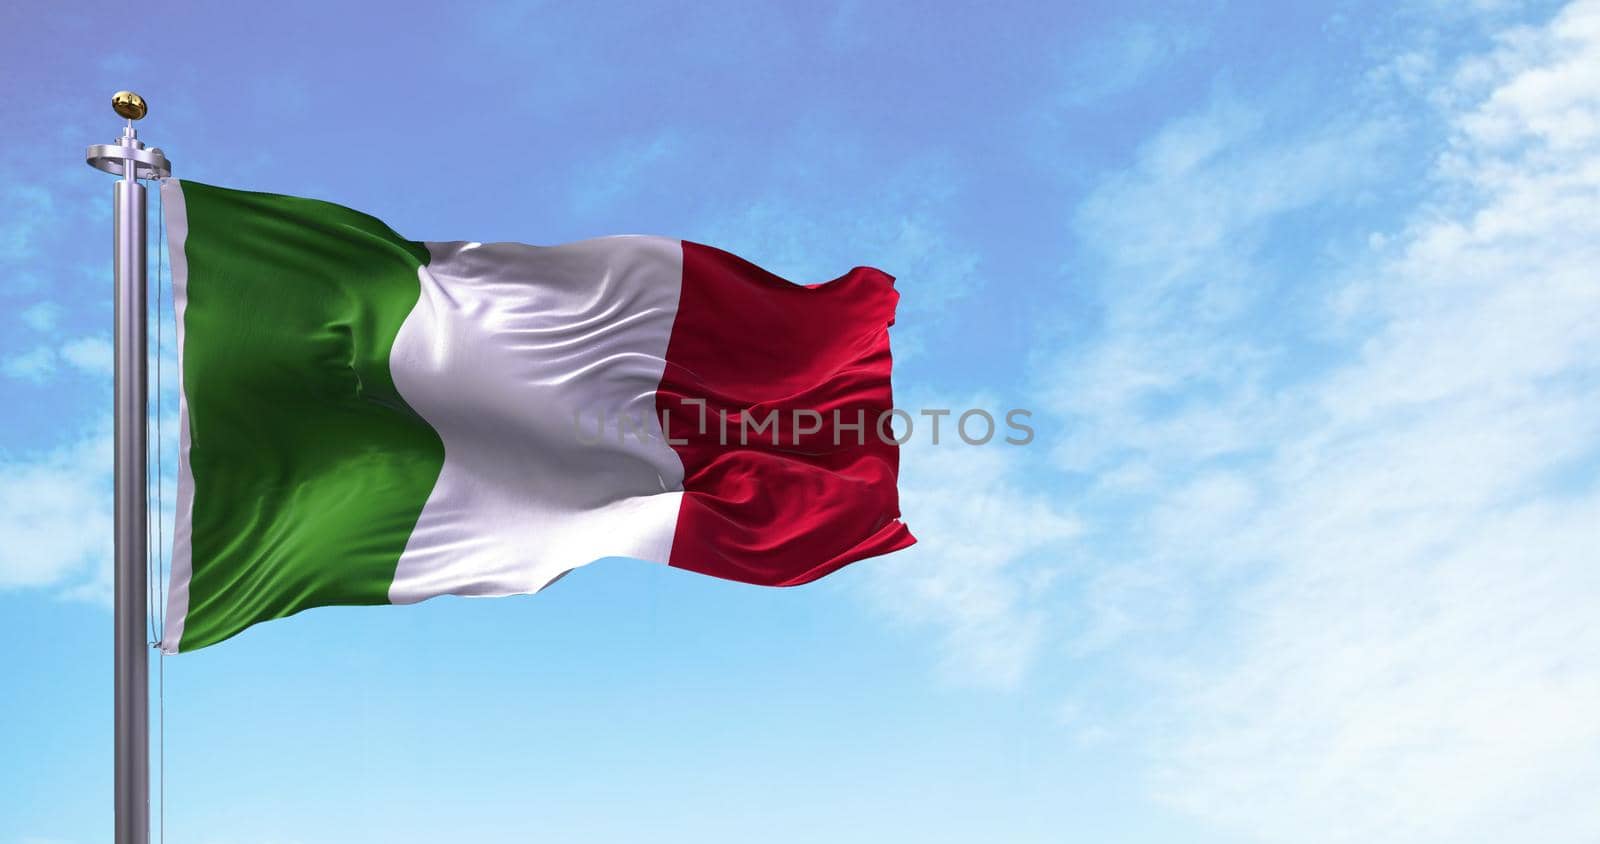 The national flag of Italy flying in the wind. Outdoors and sky in the background. Democracy and independence. European state